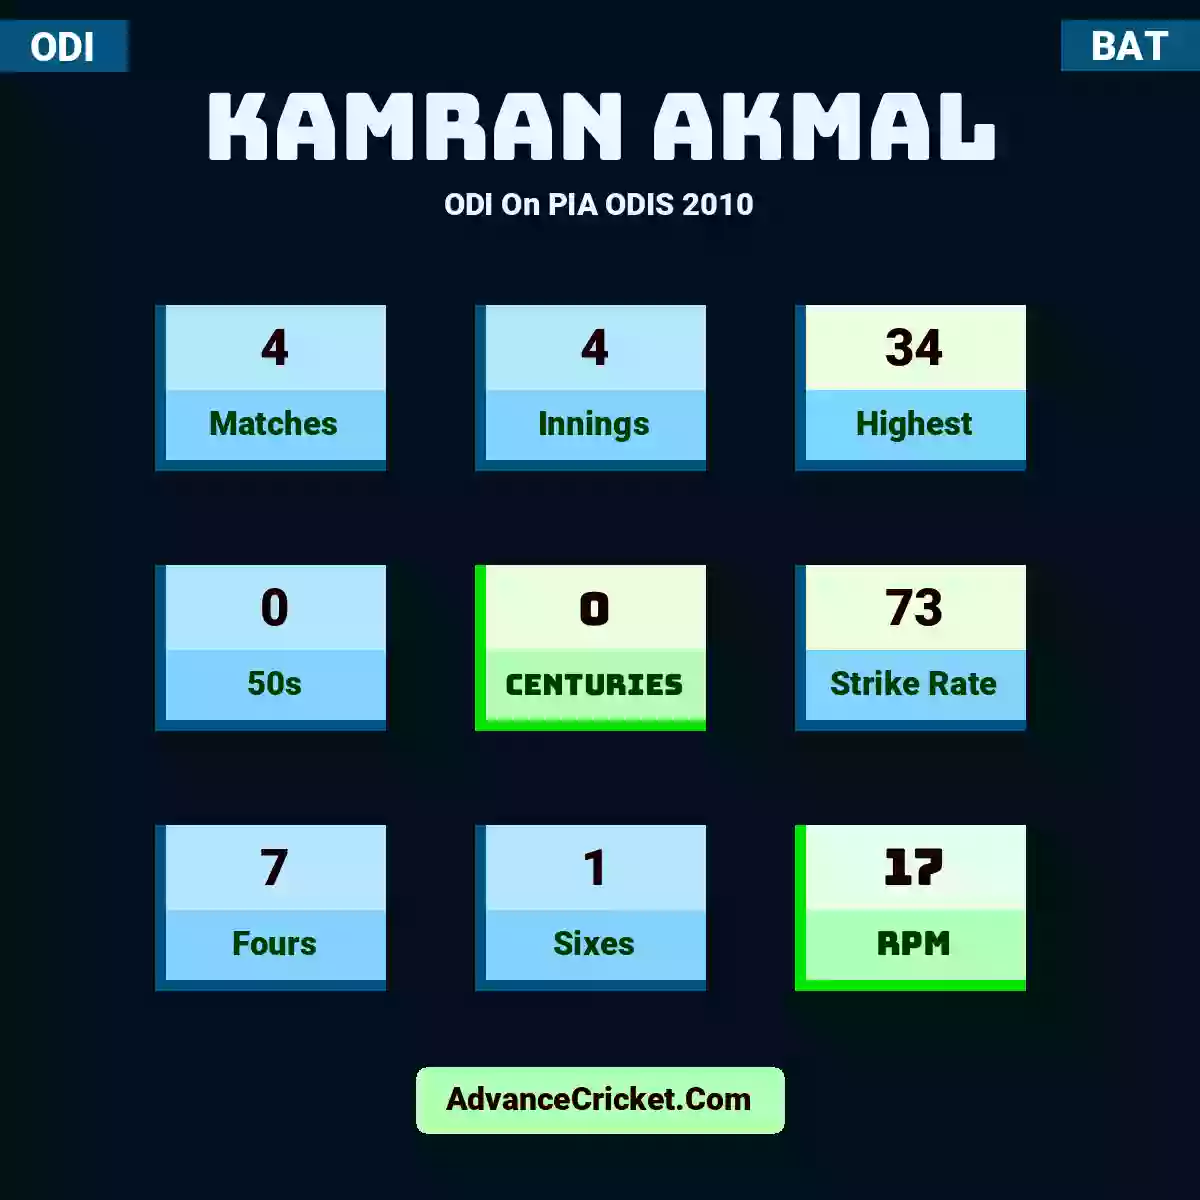 Kamran Akmal ODI  On PIA ODIS 2010, Kamran Akmal played 4 matches, scored 34 runs as highest, 0 half-centuries, and 0 centuries, with a strike rate of 73. K.Akmal hit 7 fours and 1 sixes, with an RPM of 17.